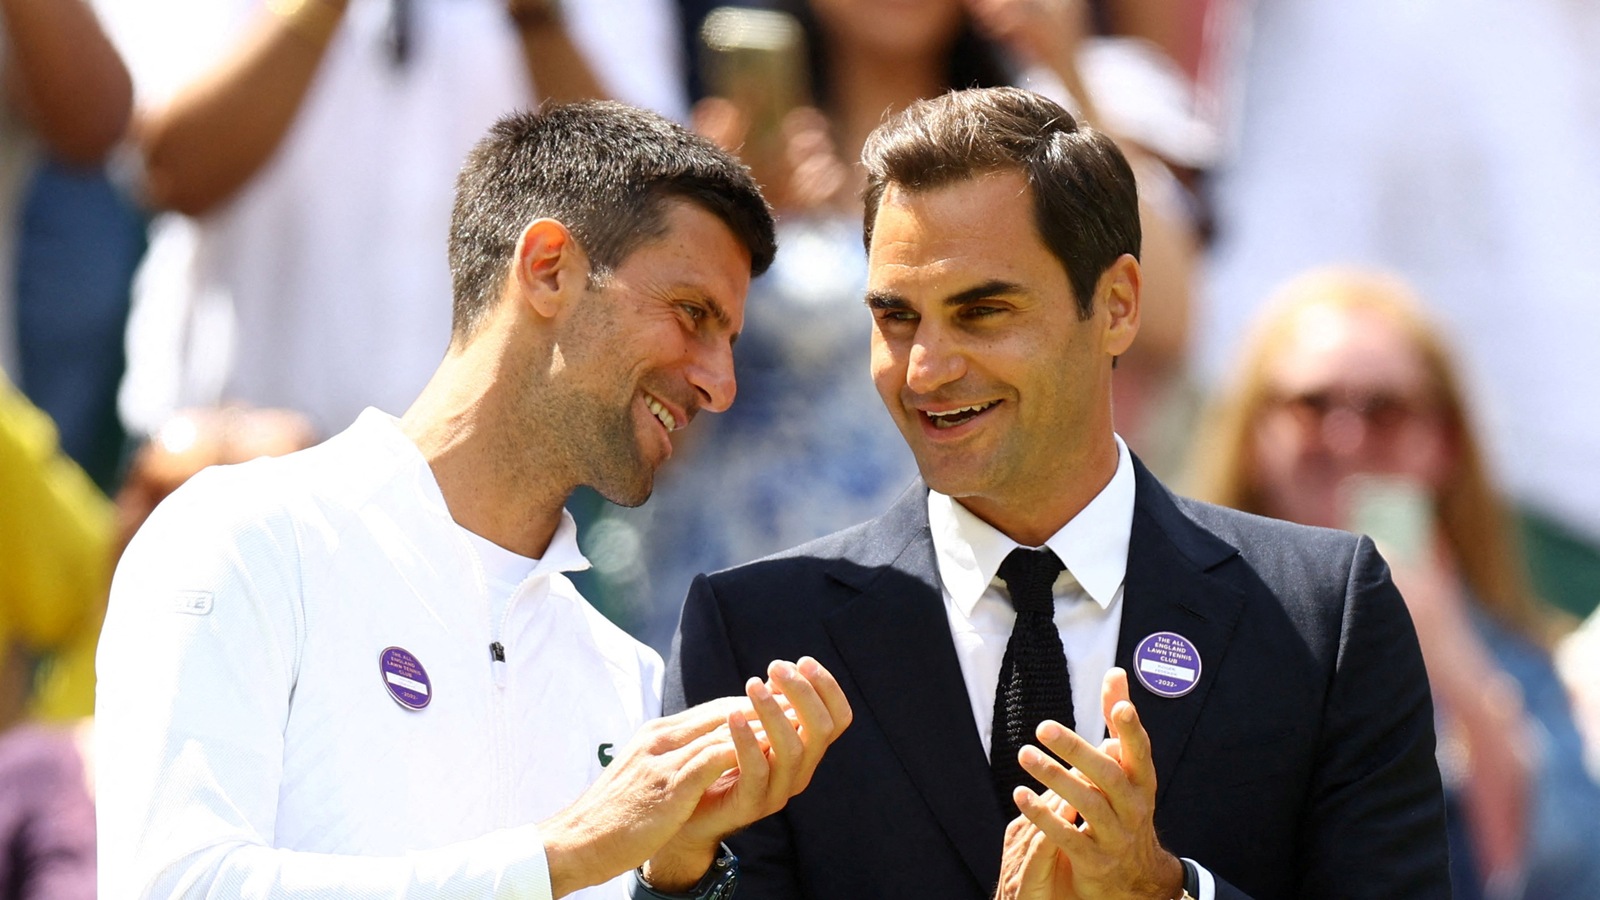 ‘Roger, it’s hard to see this day…’: Djokovic’s emotional tribute for Roger Federer after Swiss great’s retirement